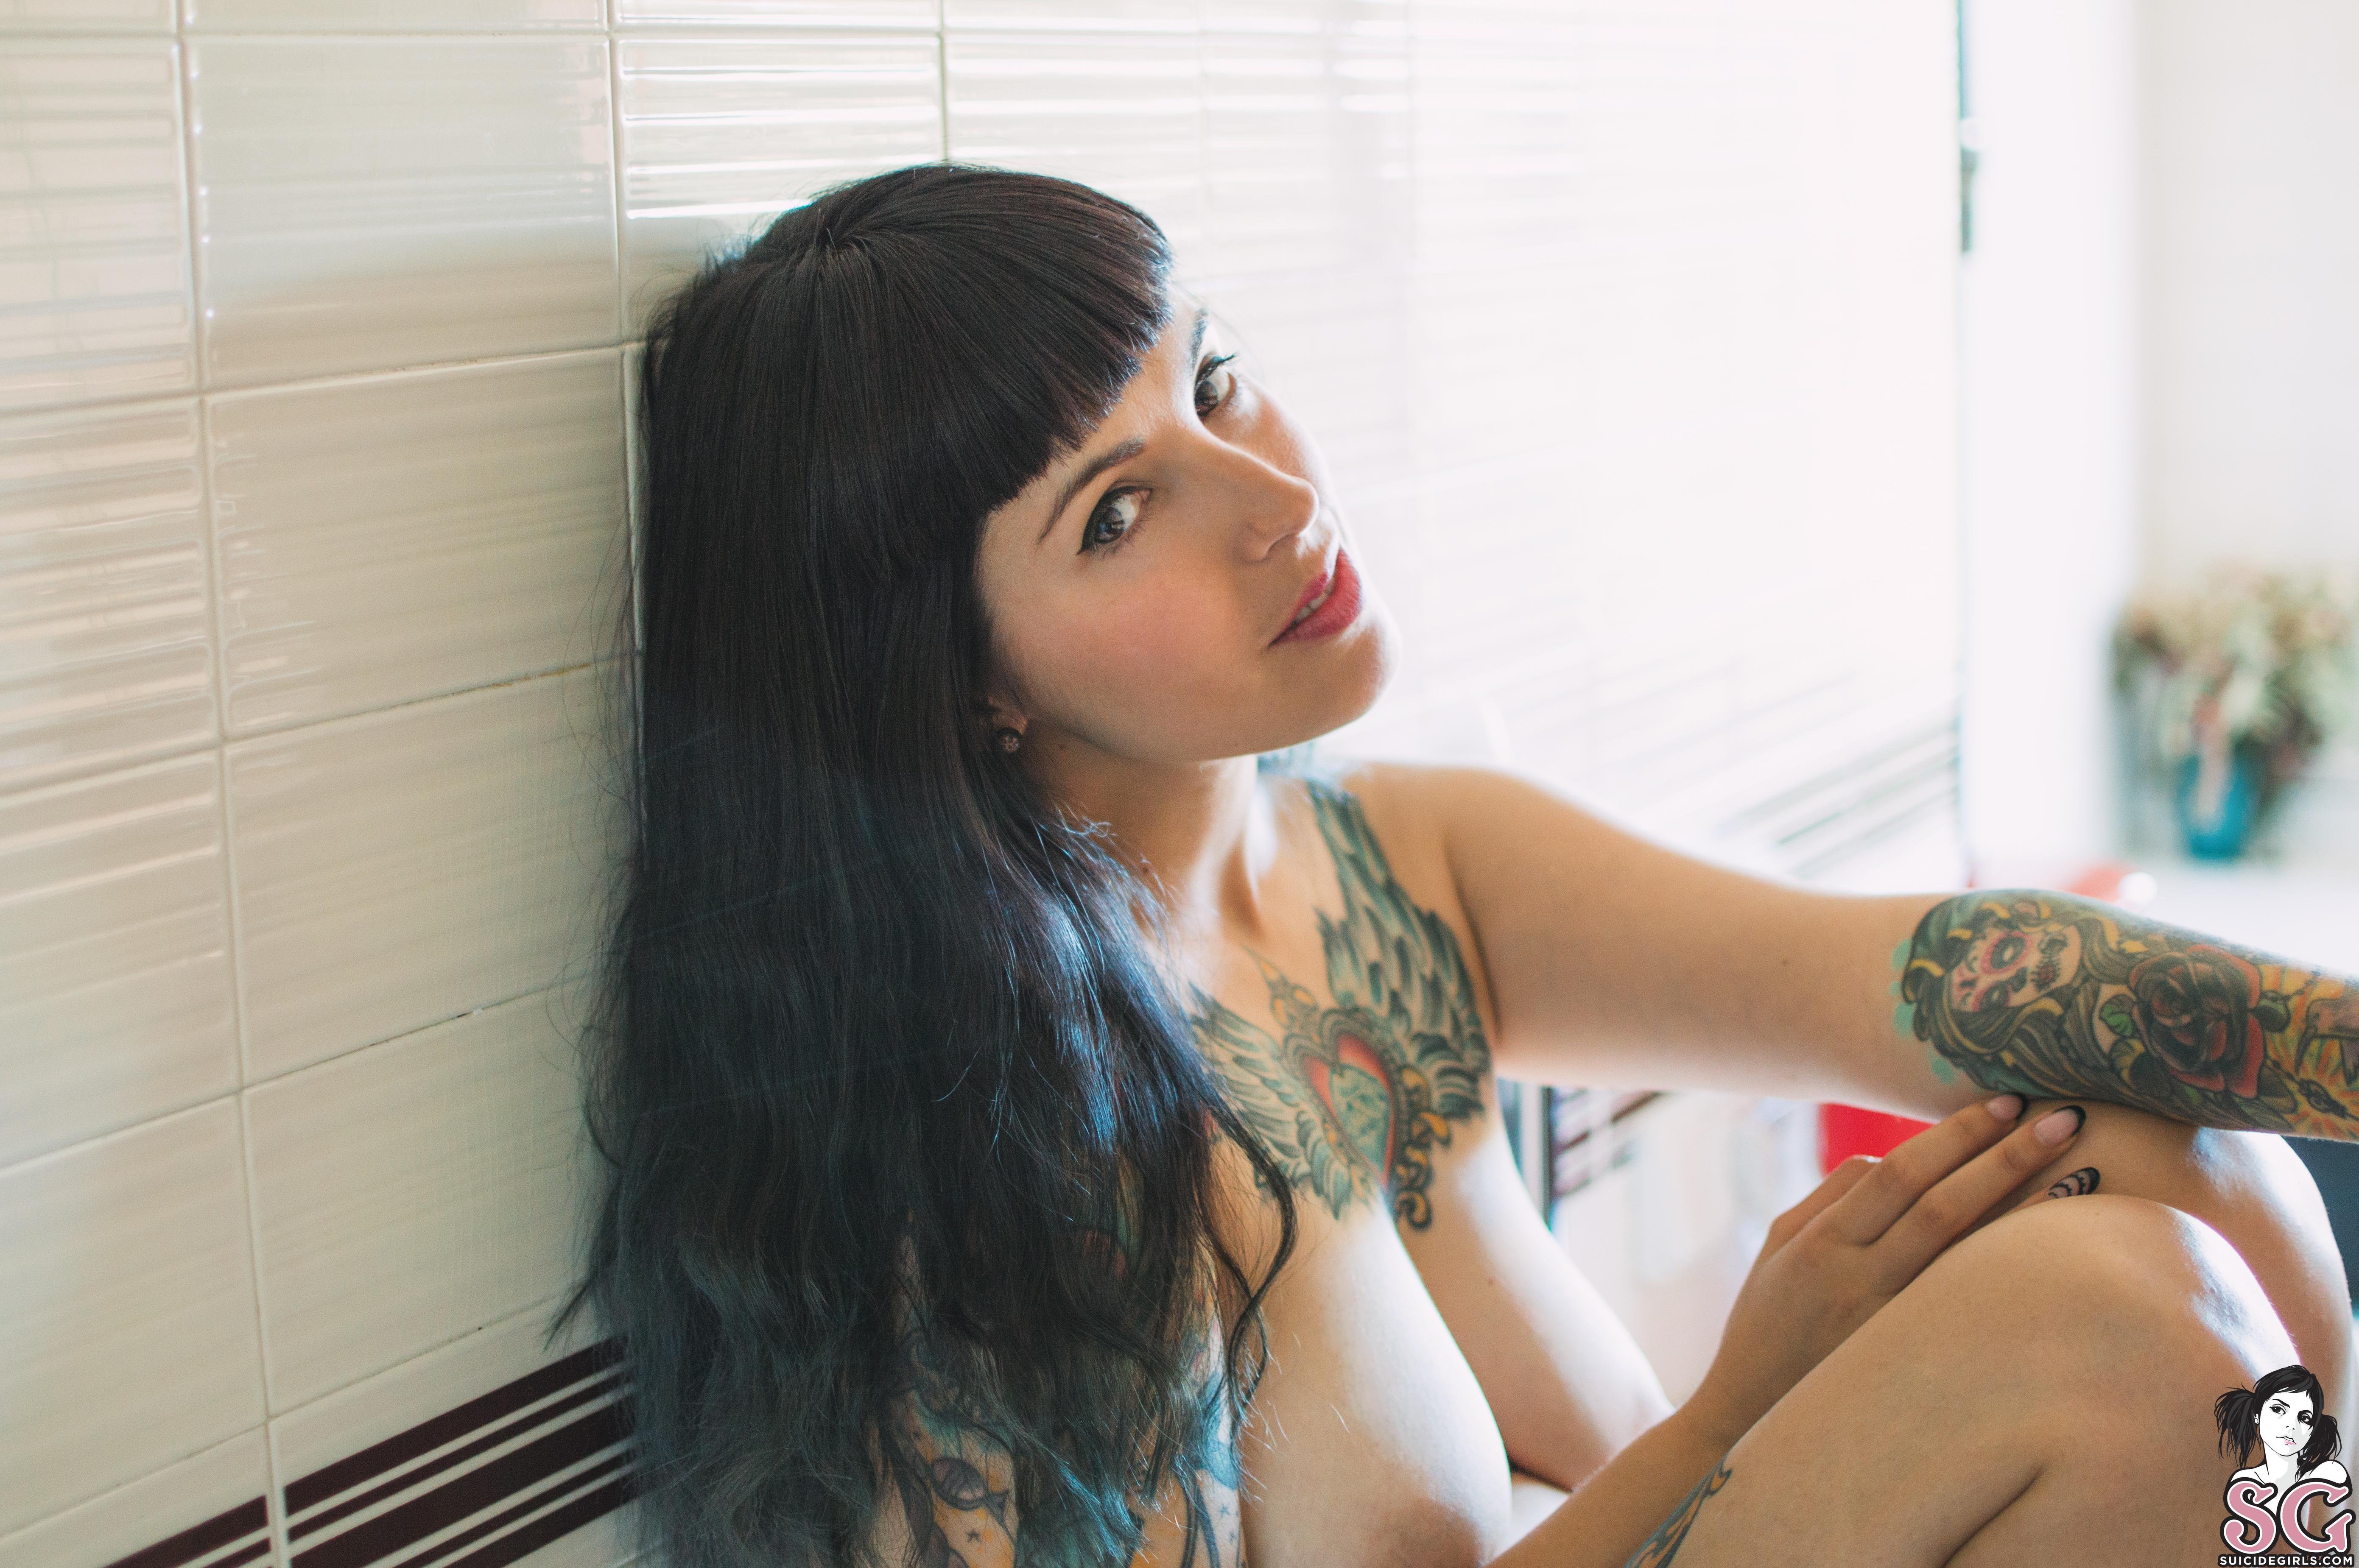 ashley barta recommends asian suicide girls nude pic